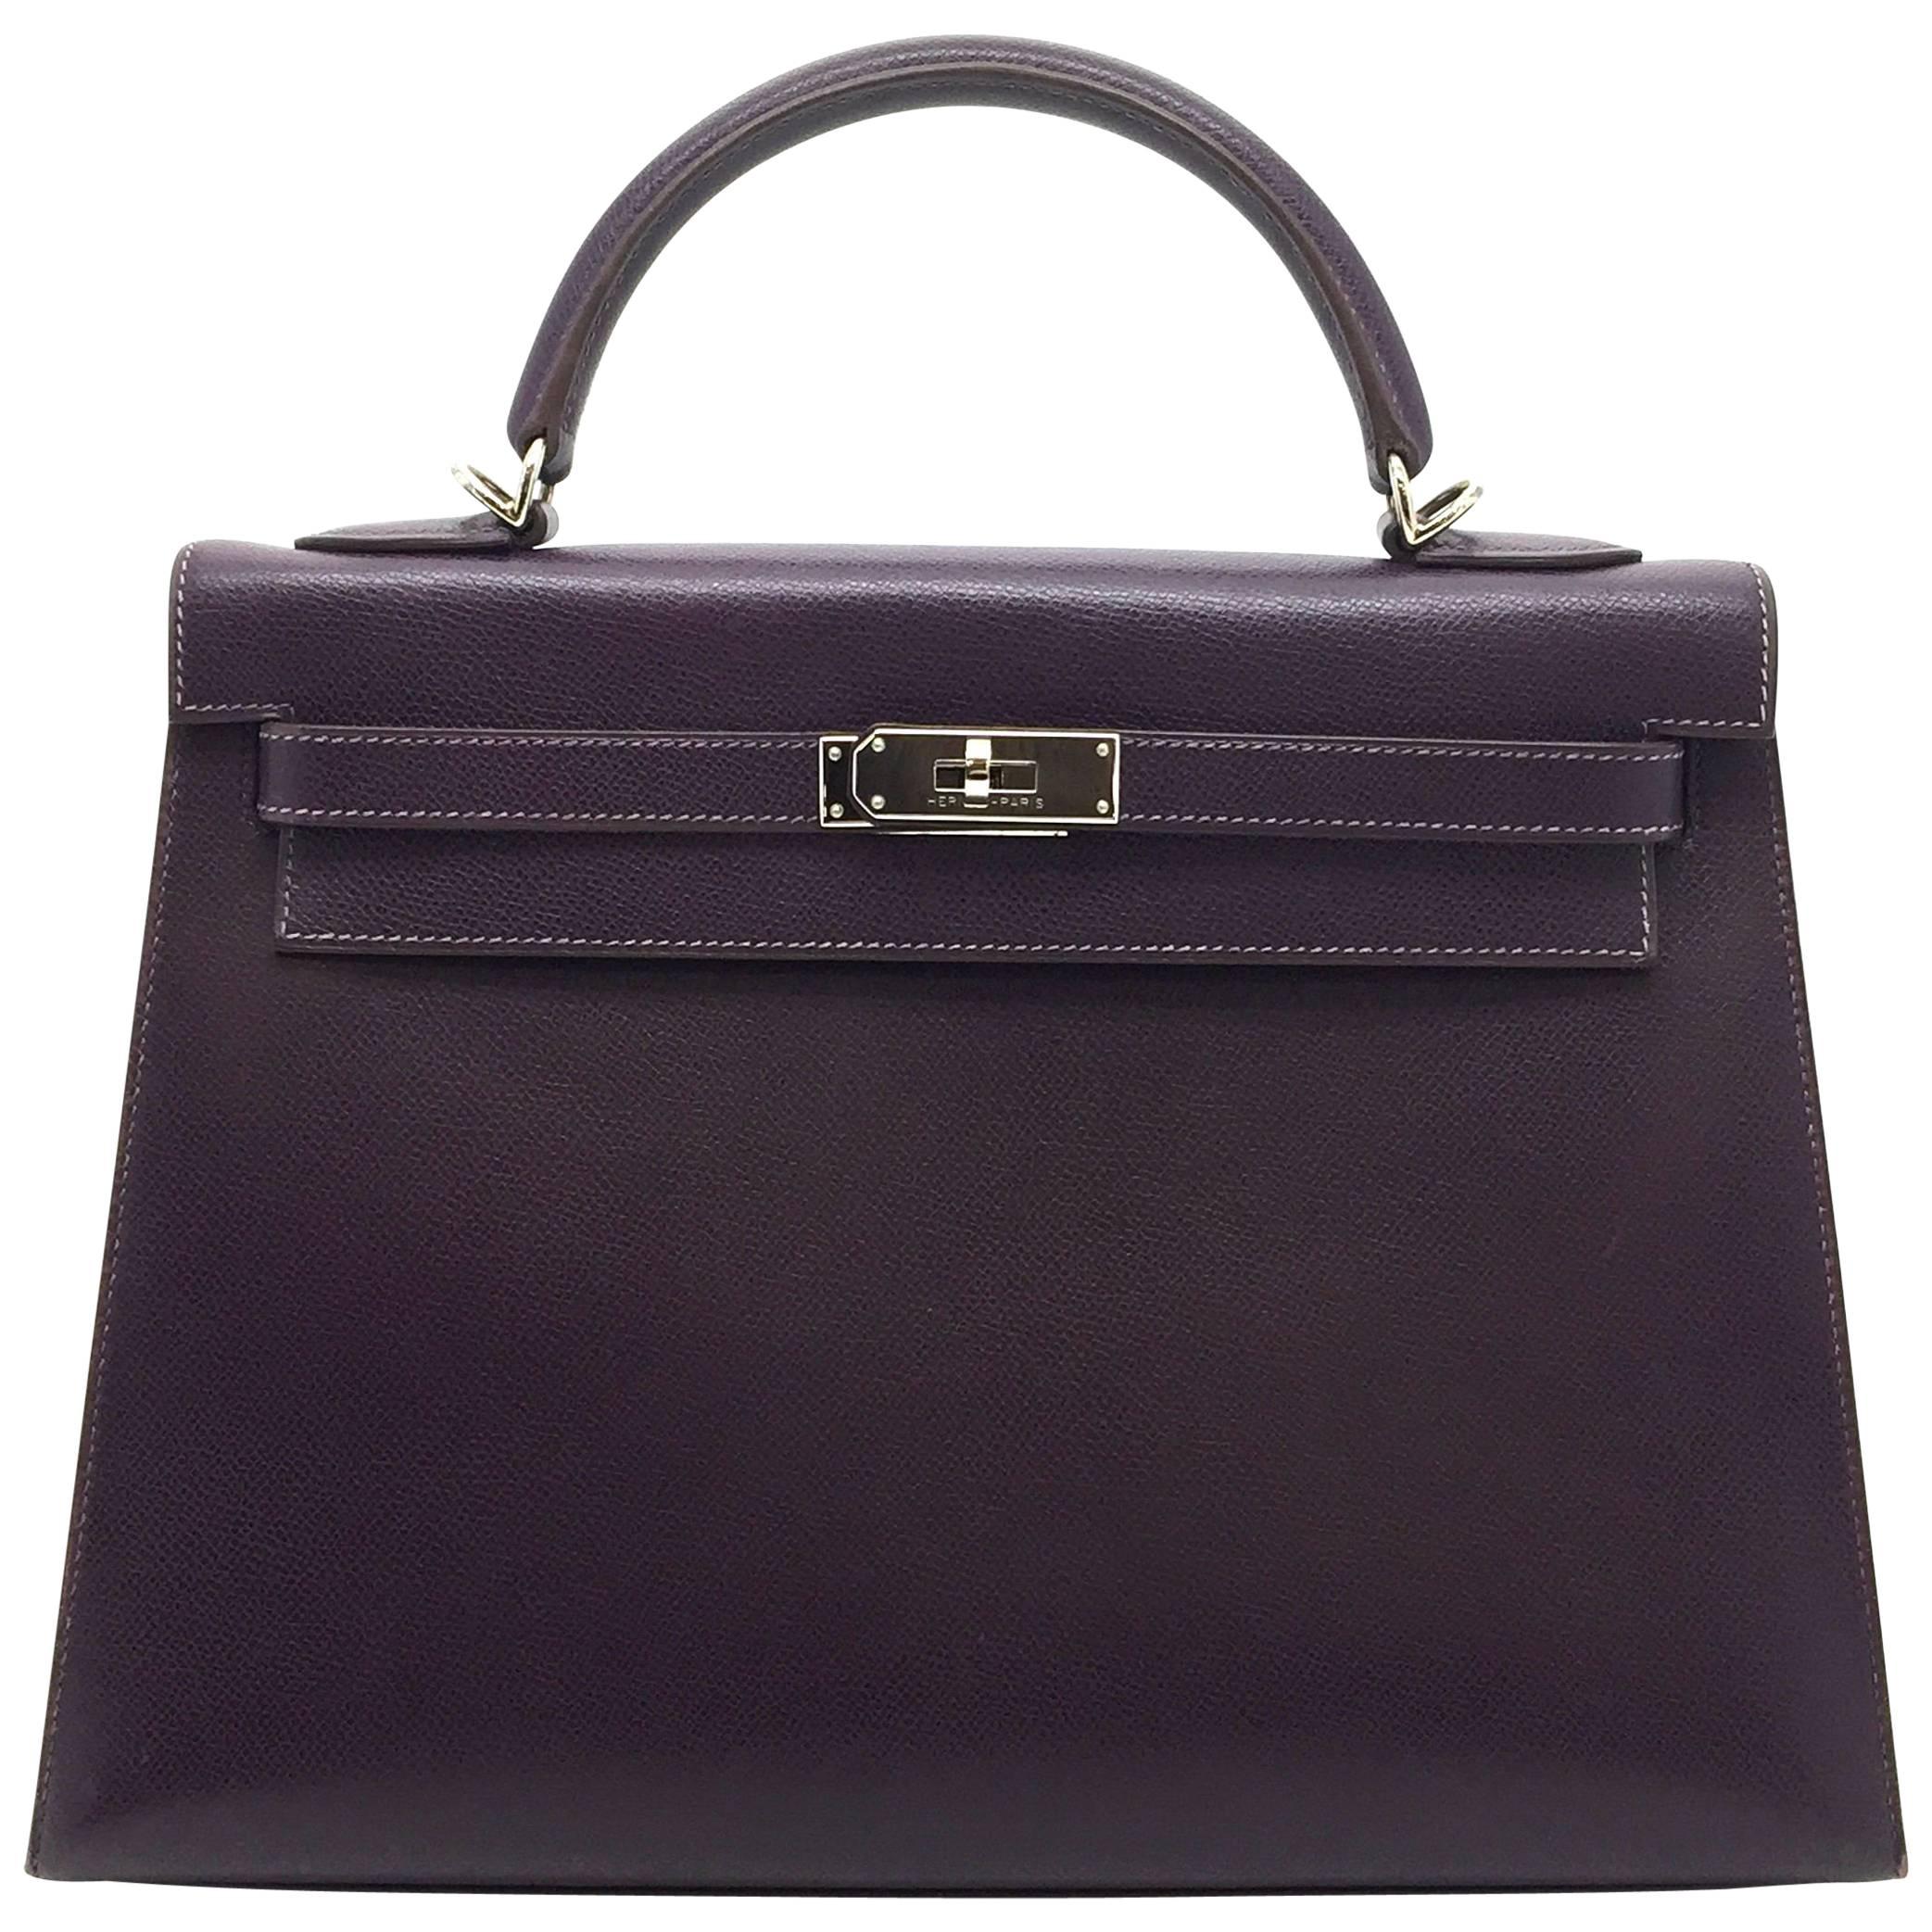 Hermes Kelly 32 Raisin Courchevel Leather SHW Top Handle Bag For Sale